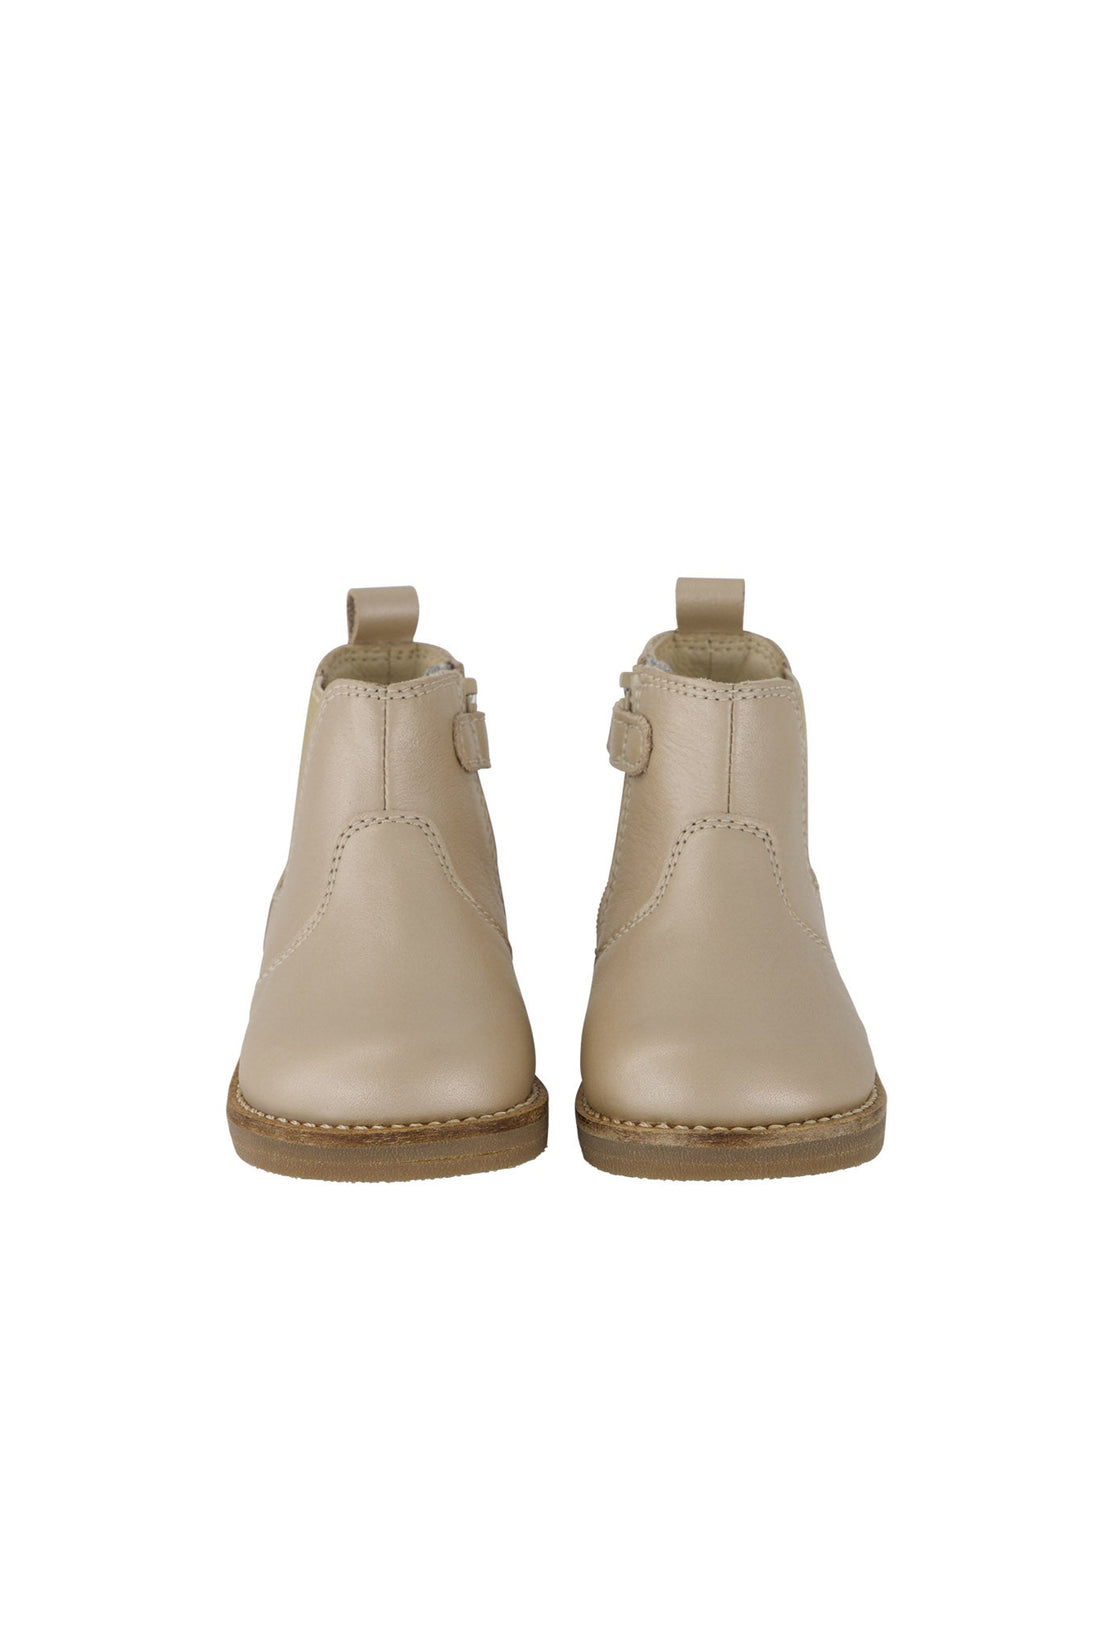 Leather Boot with Elastic Side - Matt Gold Childrens Footwear from Jamie Kay USA